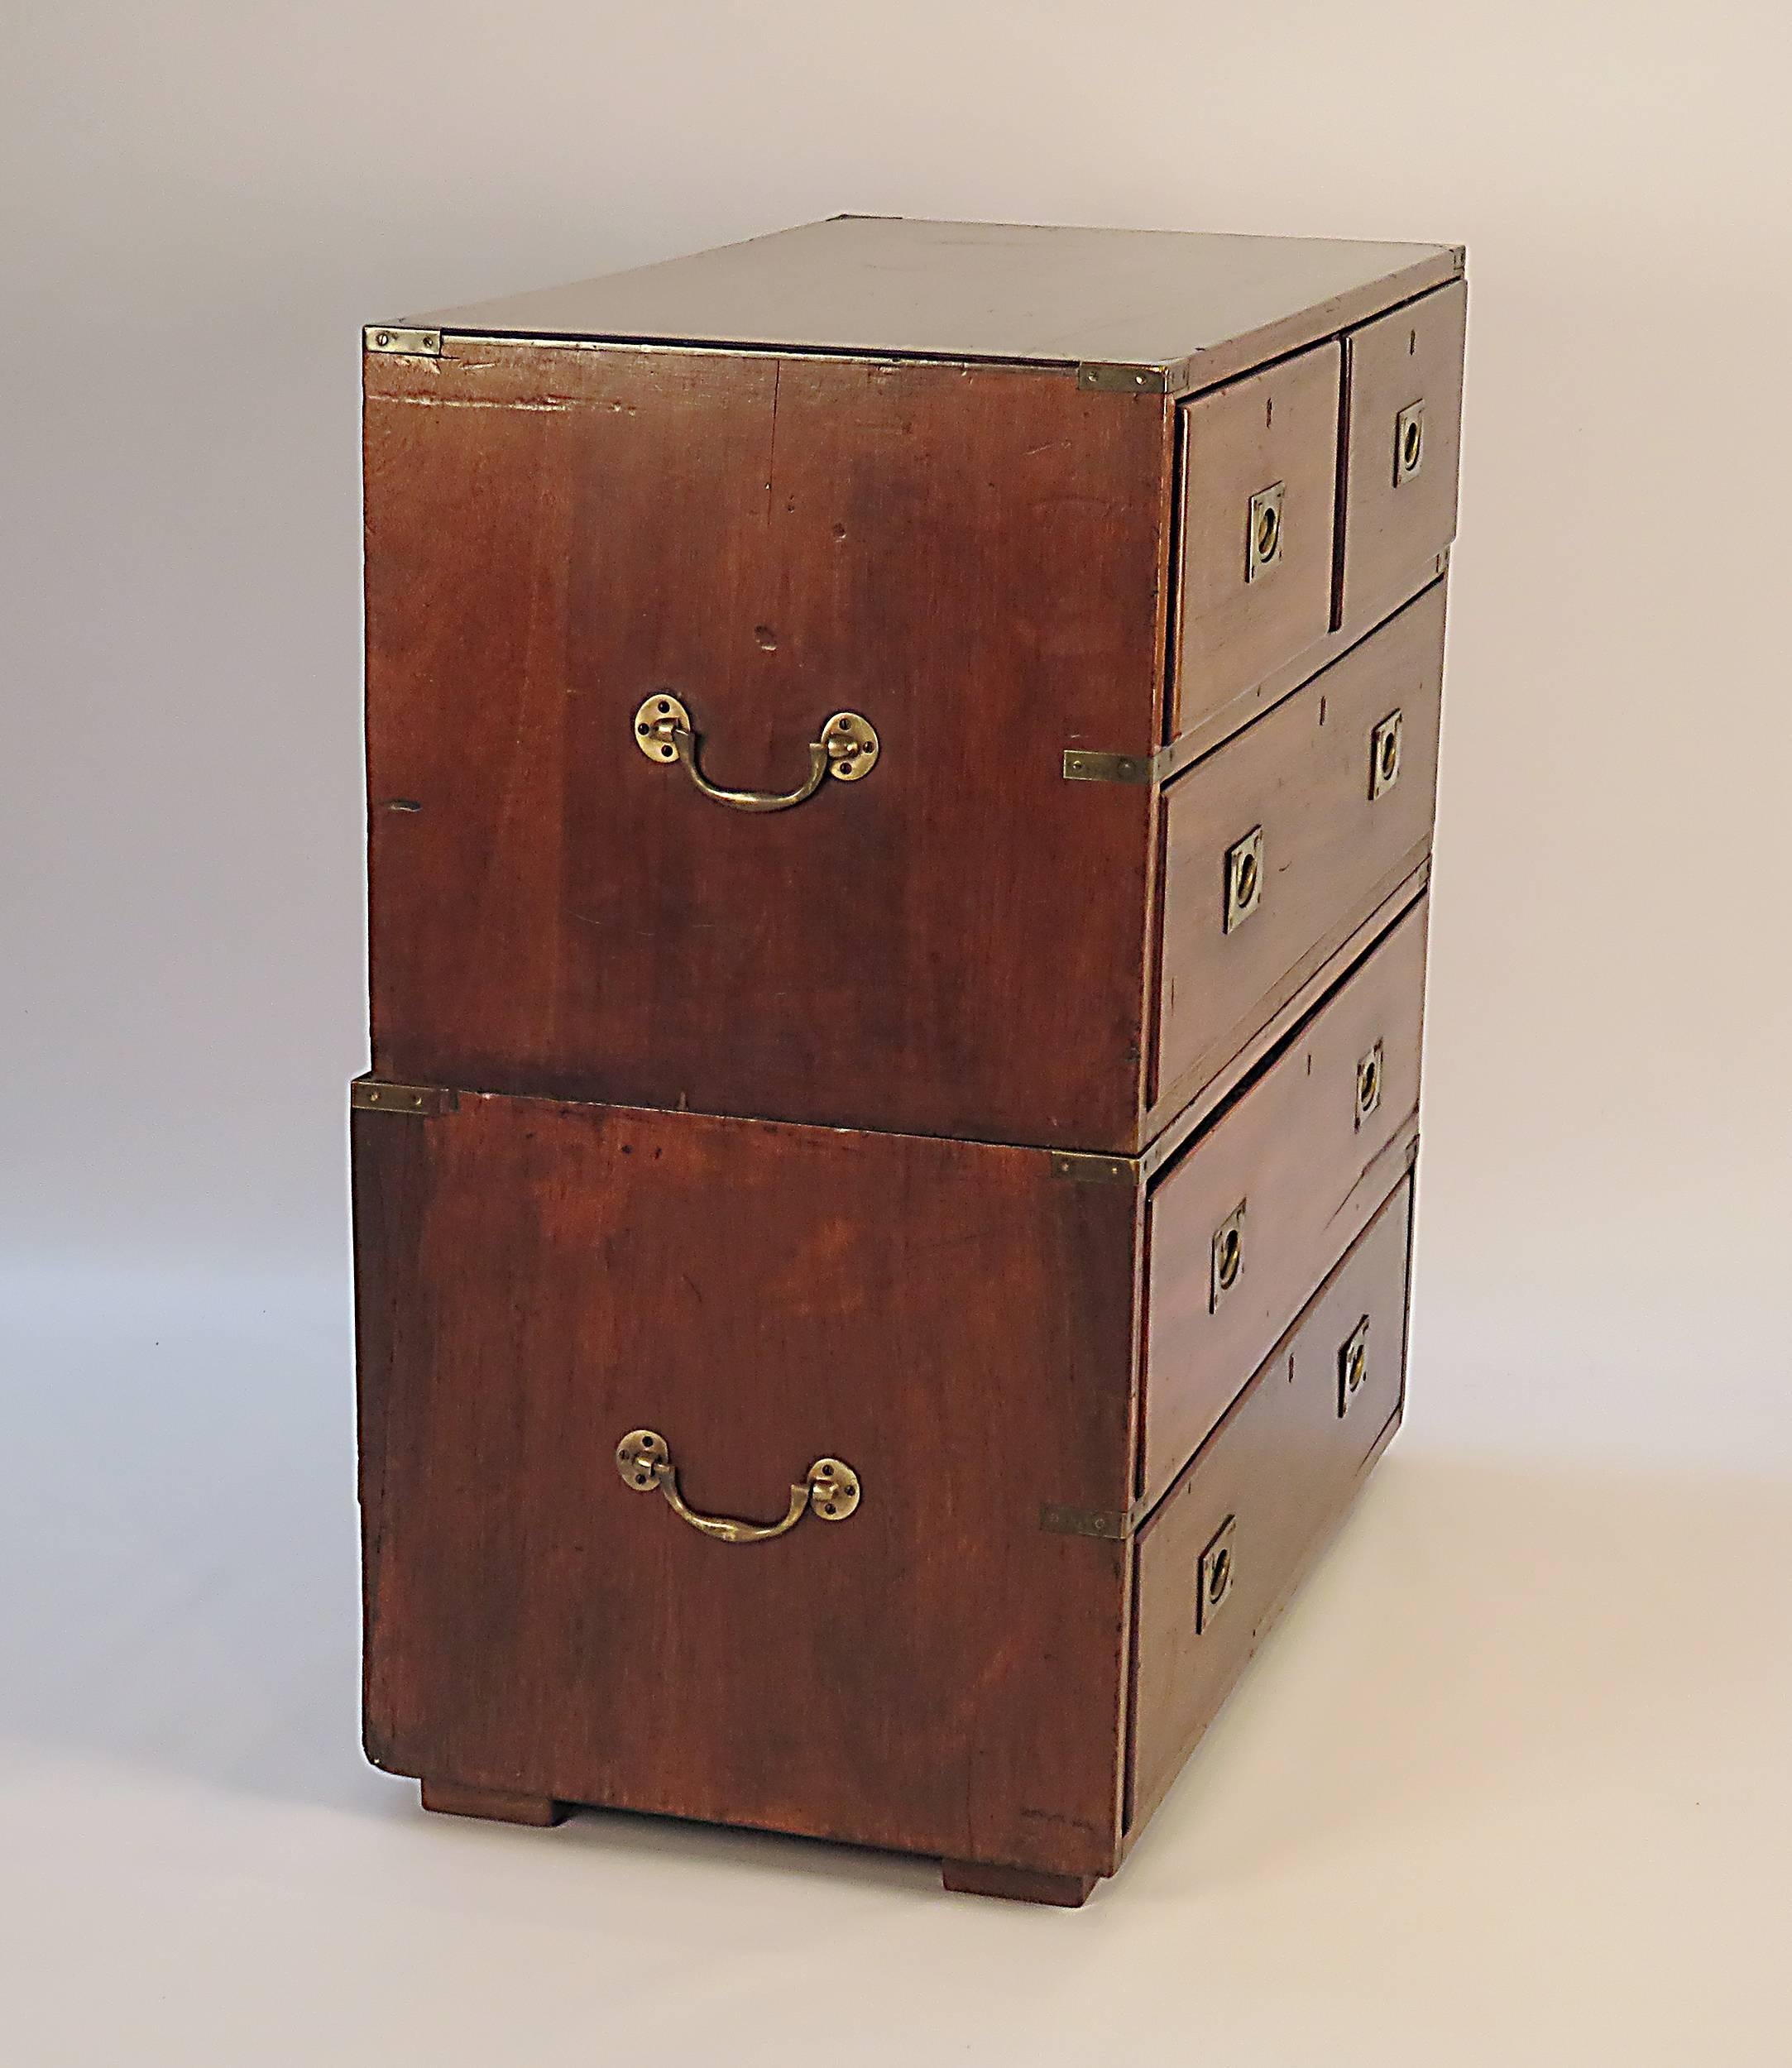 A good Indian colonial period Campaign chest in two sections made, circa 1890. One section on block feet. With inset brass handles. Another nearly identical example being offered separately.